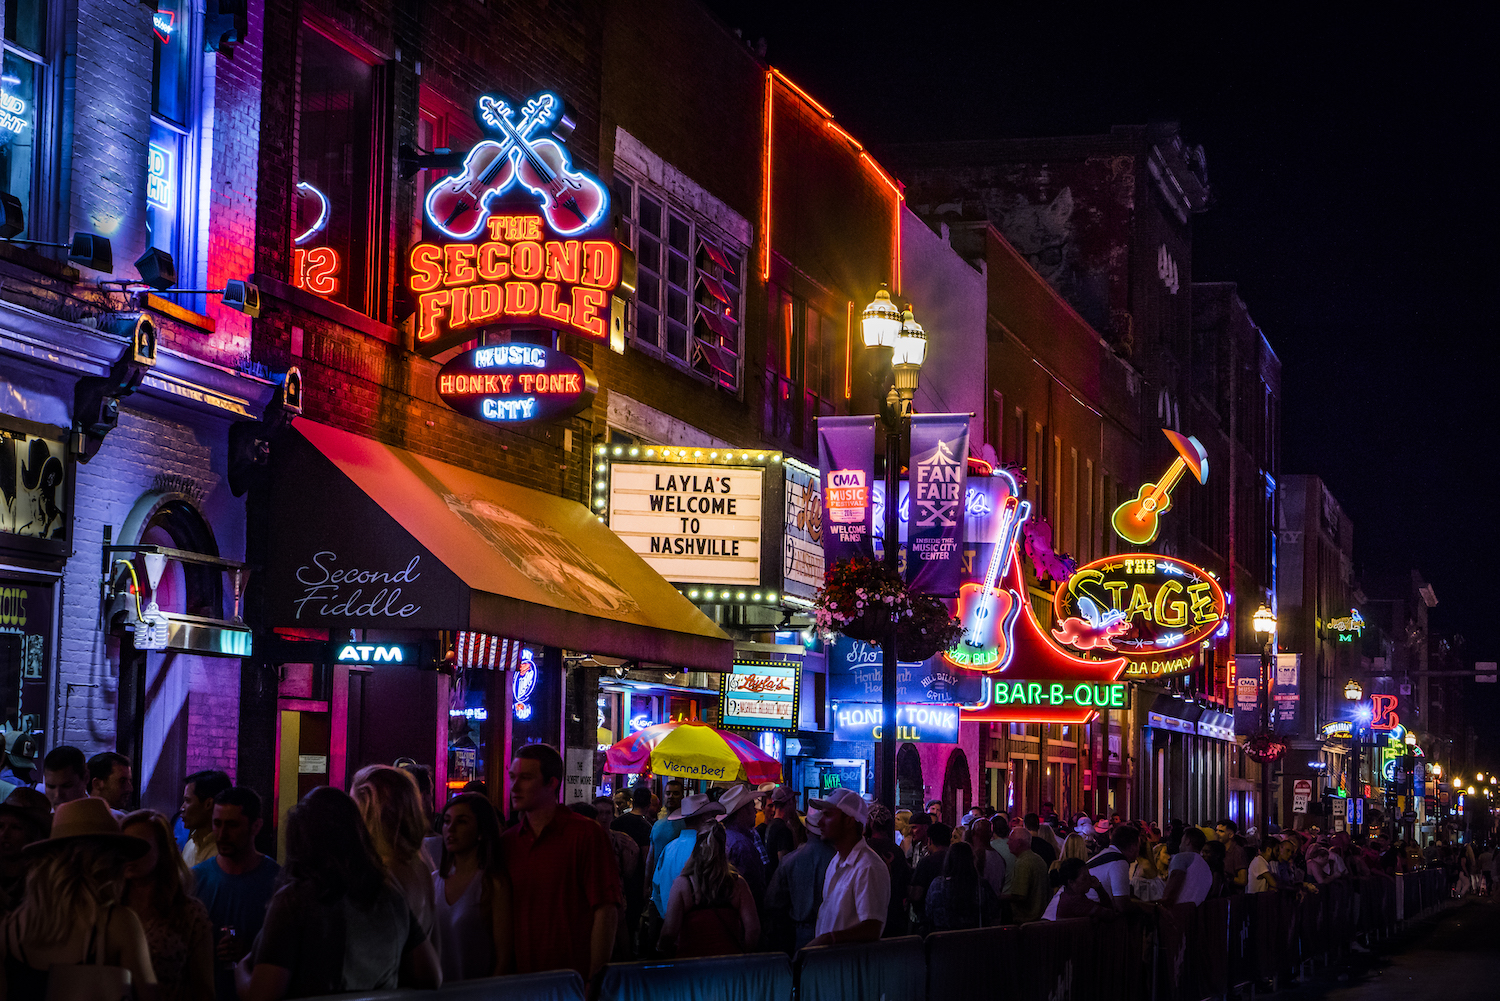 Lower Broadway in Nashville is a renowned entertainment district for country music.